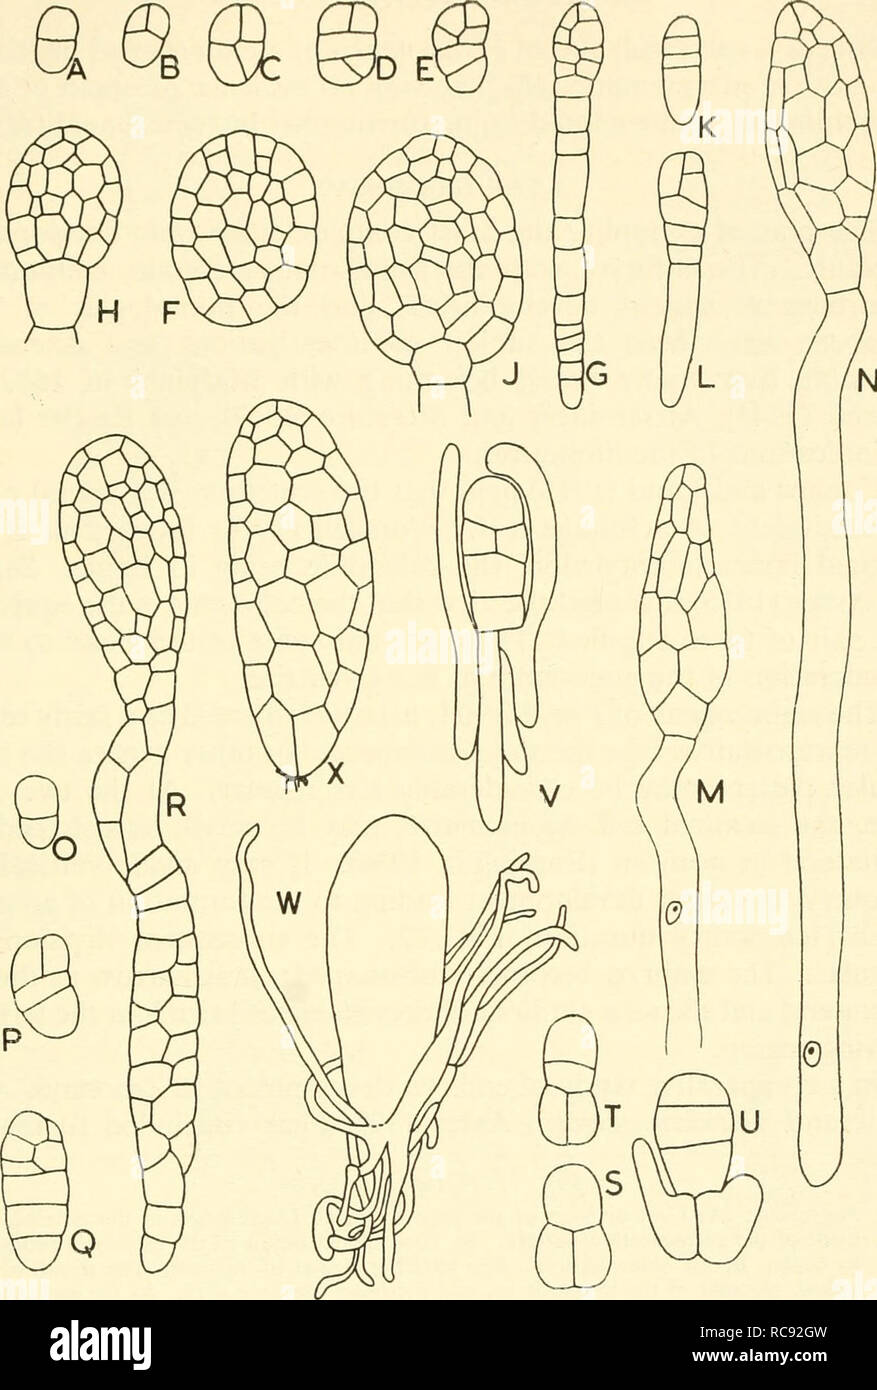 Embryogenesis In Plants Embryology Qgmqo Fig 70 Orchid Embryos A F Epipactis Pahistris A E Early Proembryo Stages F Mature Embryo G H J Orchis Latifoua G Filamentous Embryo With Suspensor And Four Tiered